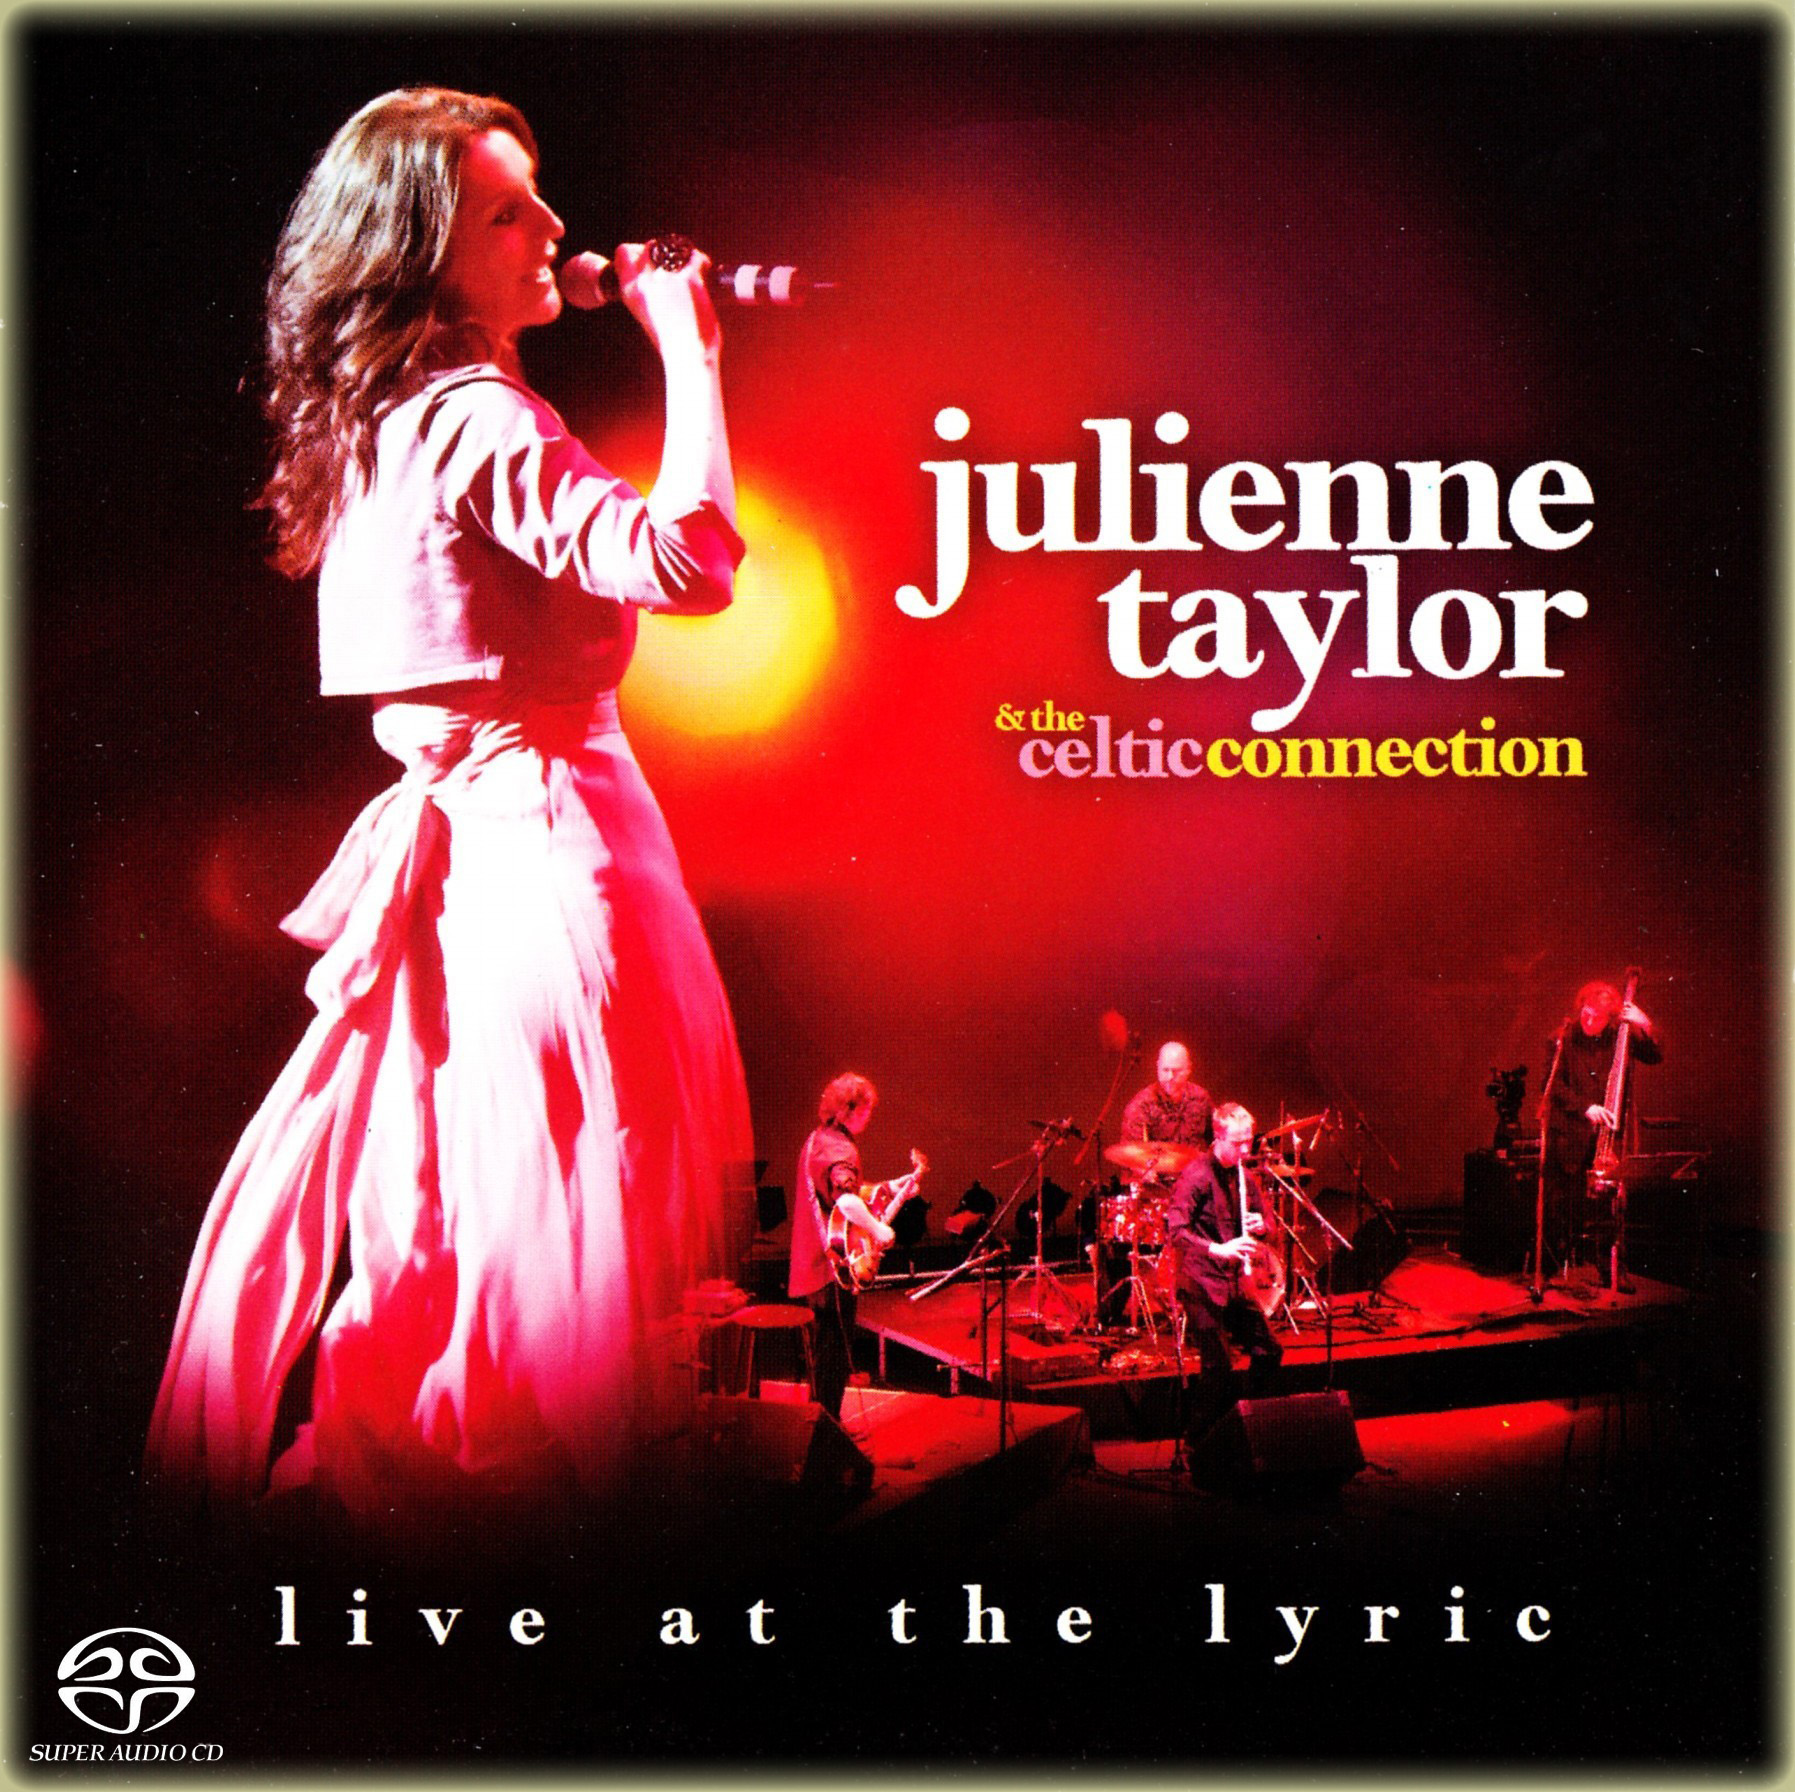 Julienne Taylor & The Celtic Connection – Live At The Lyric (2012) MCH SACD ISO